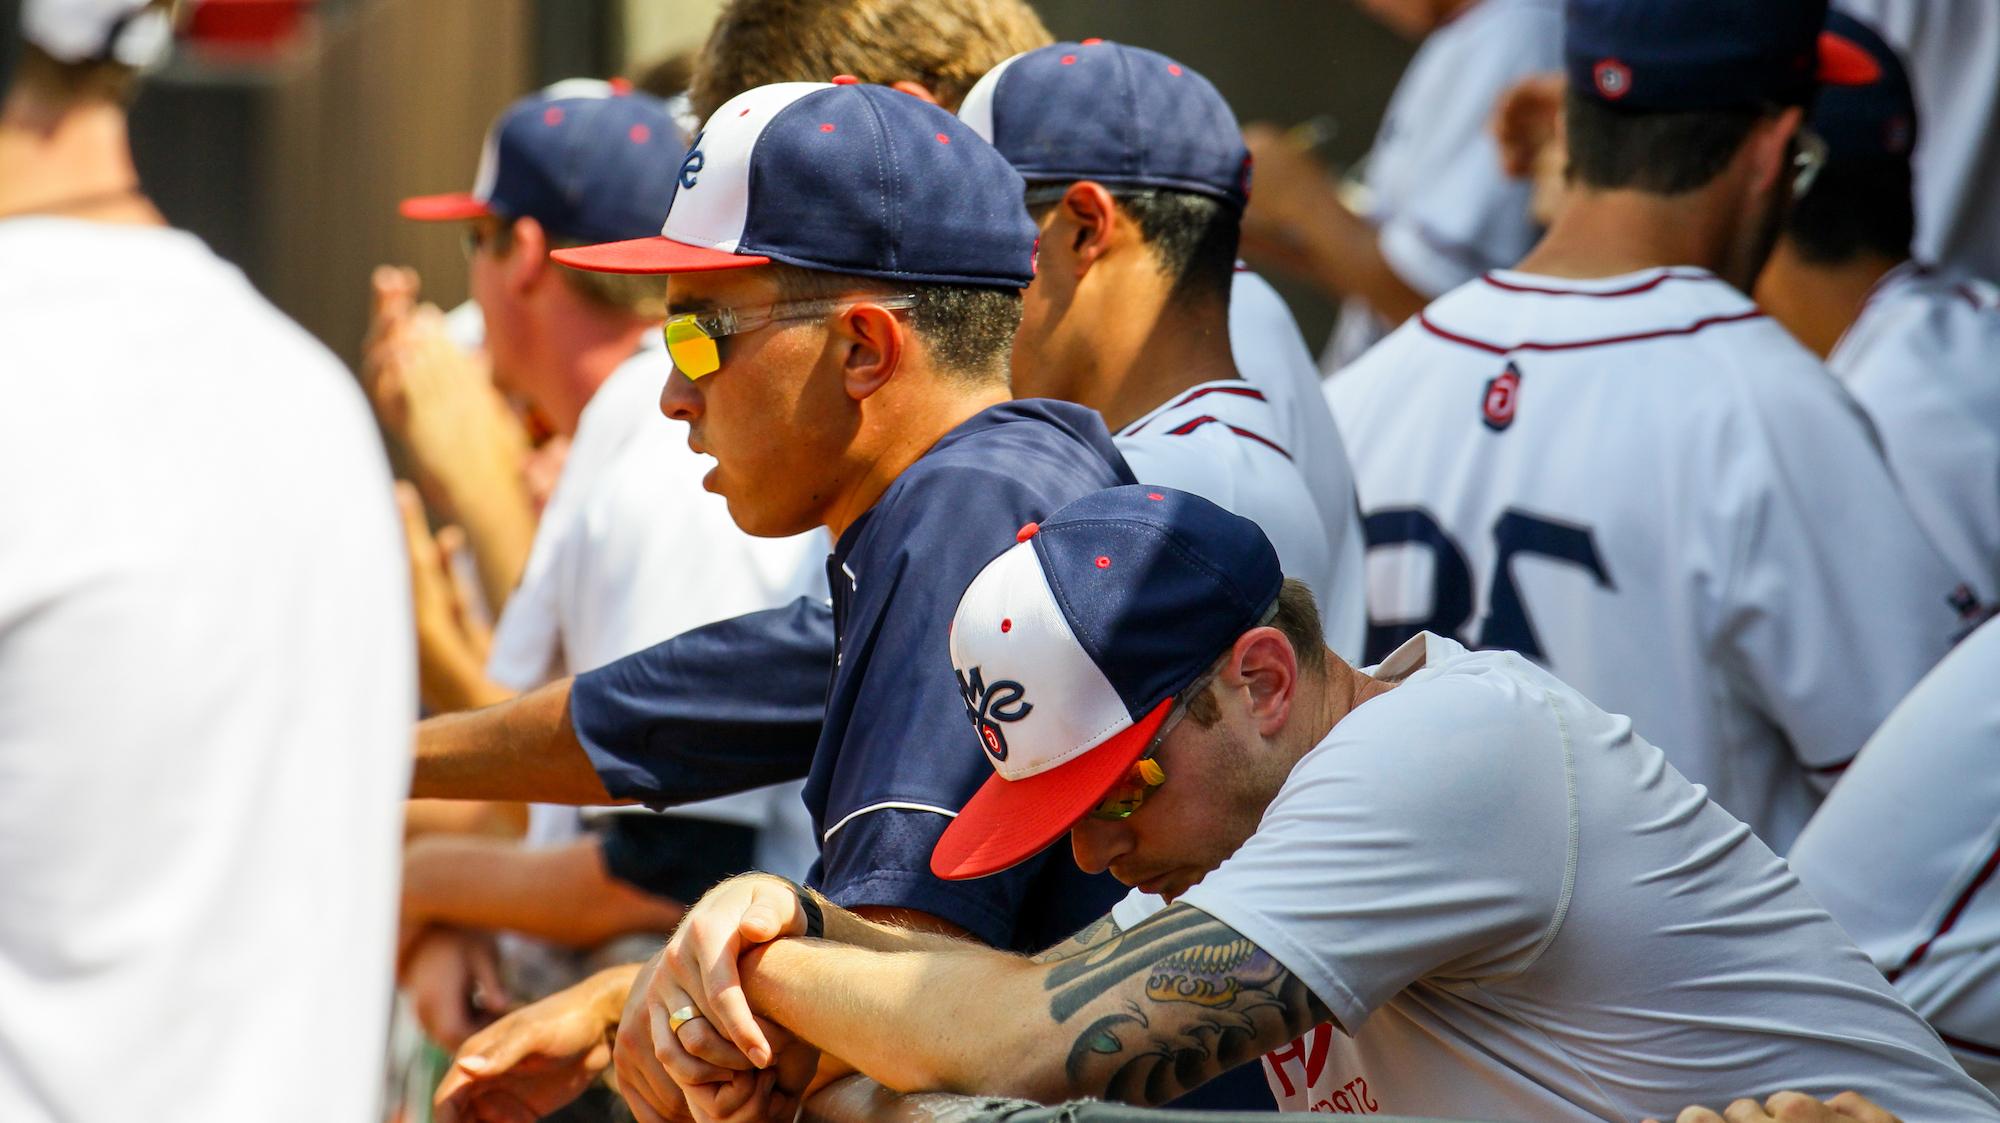 Max Molz (center) in the dugout during a NCAA Regional in 2016